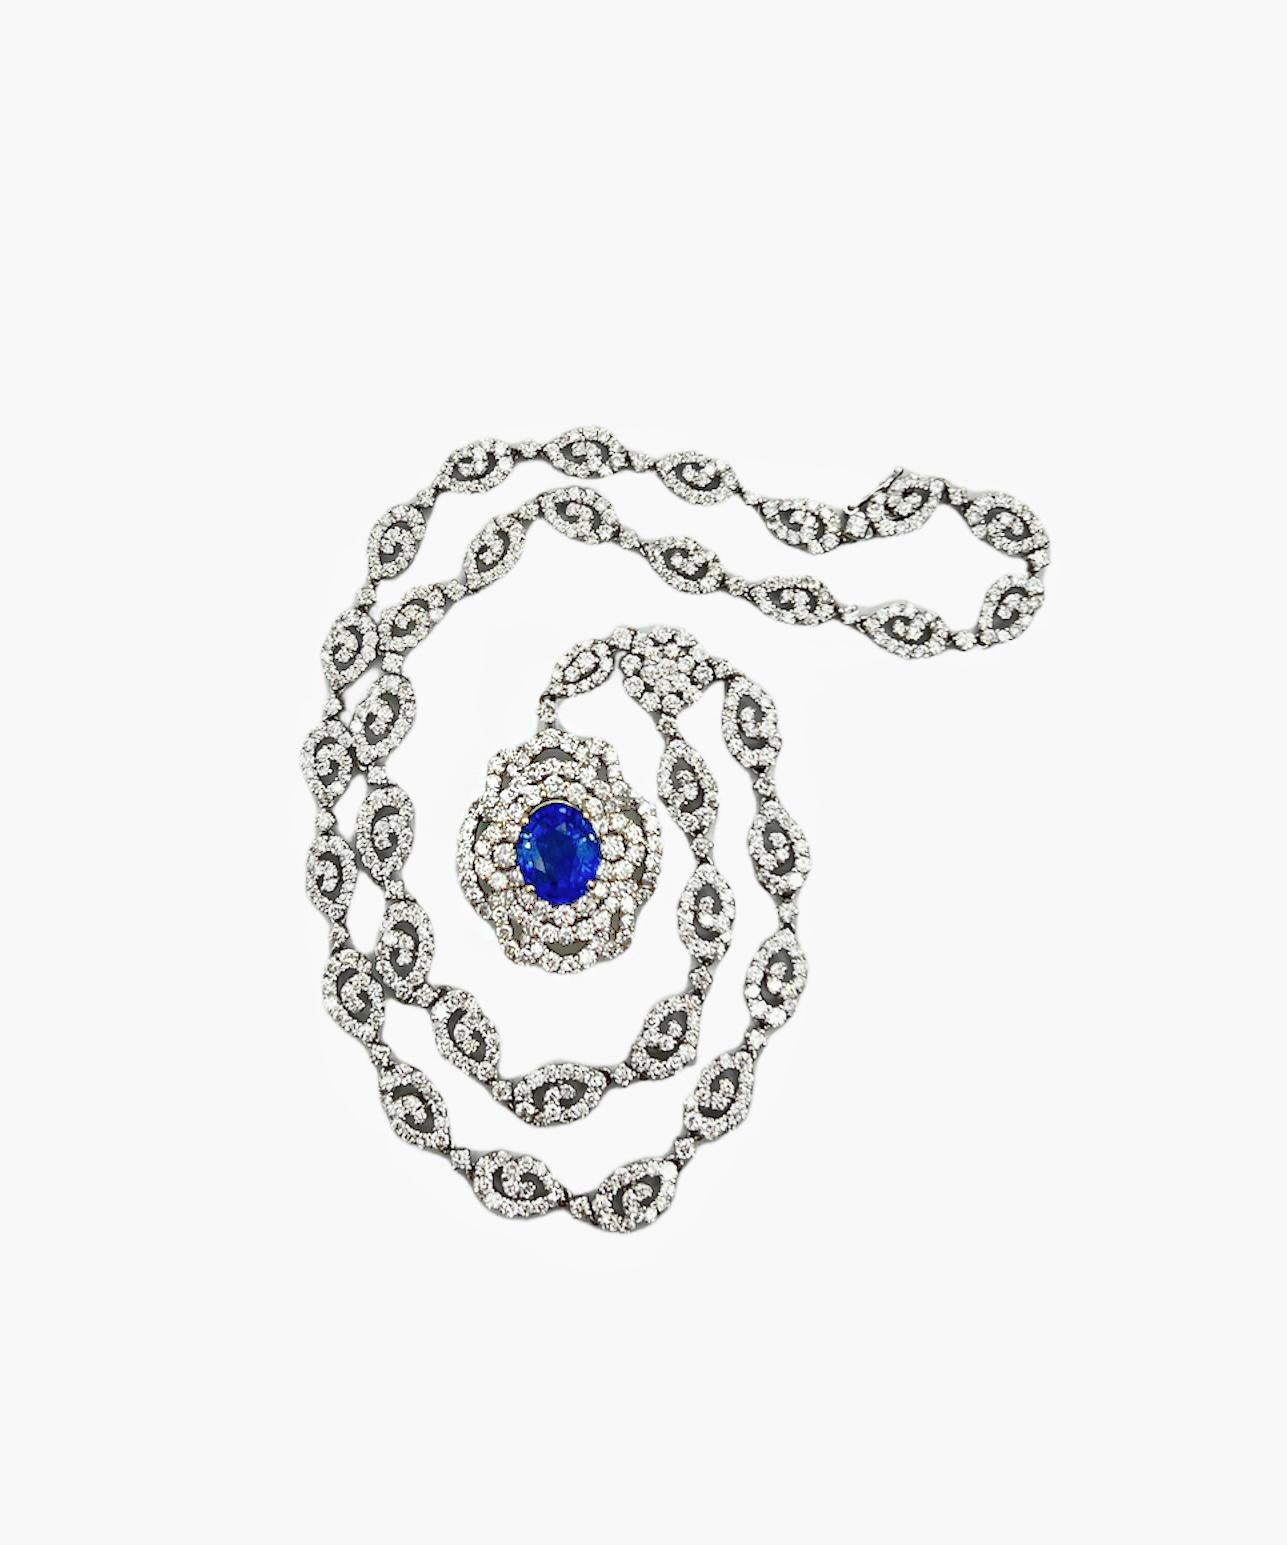 Women's or Men's Handmade 17.17 Total Carat Sapphire and Diamond White Gold Pendant Necklace, GIA For Sale